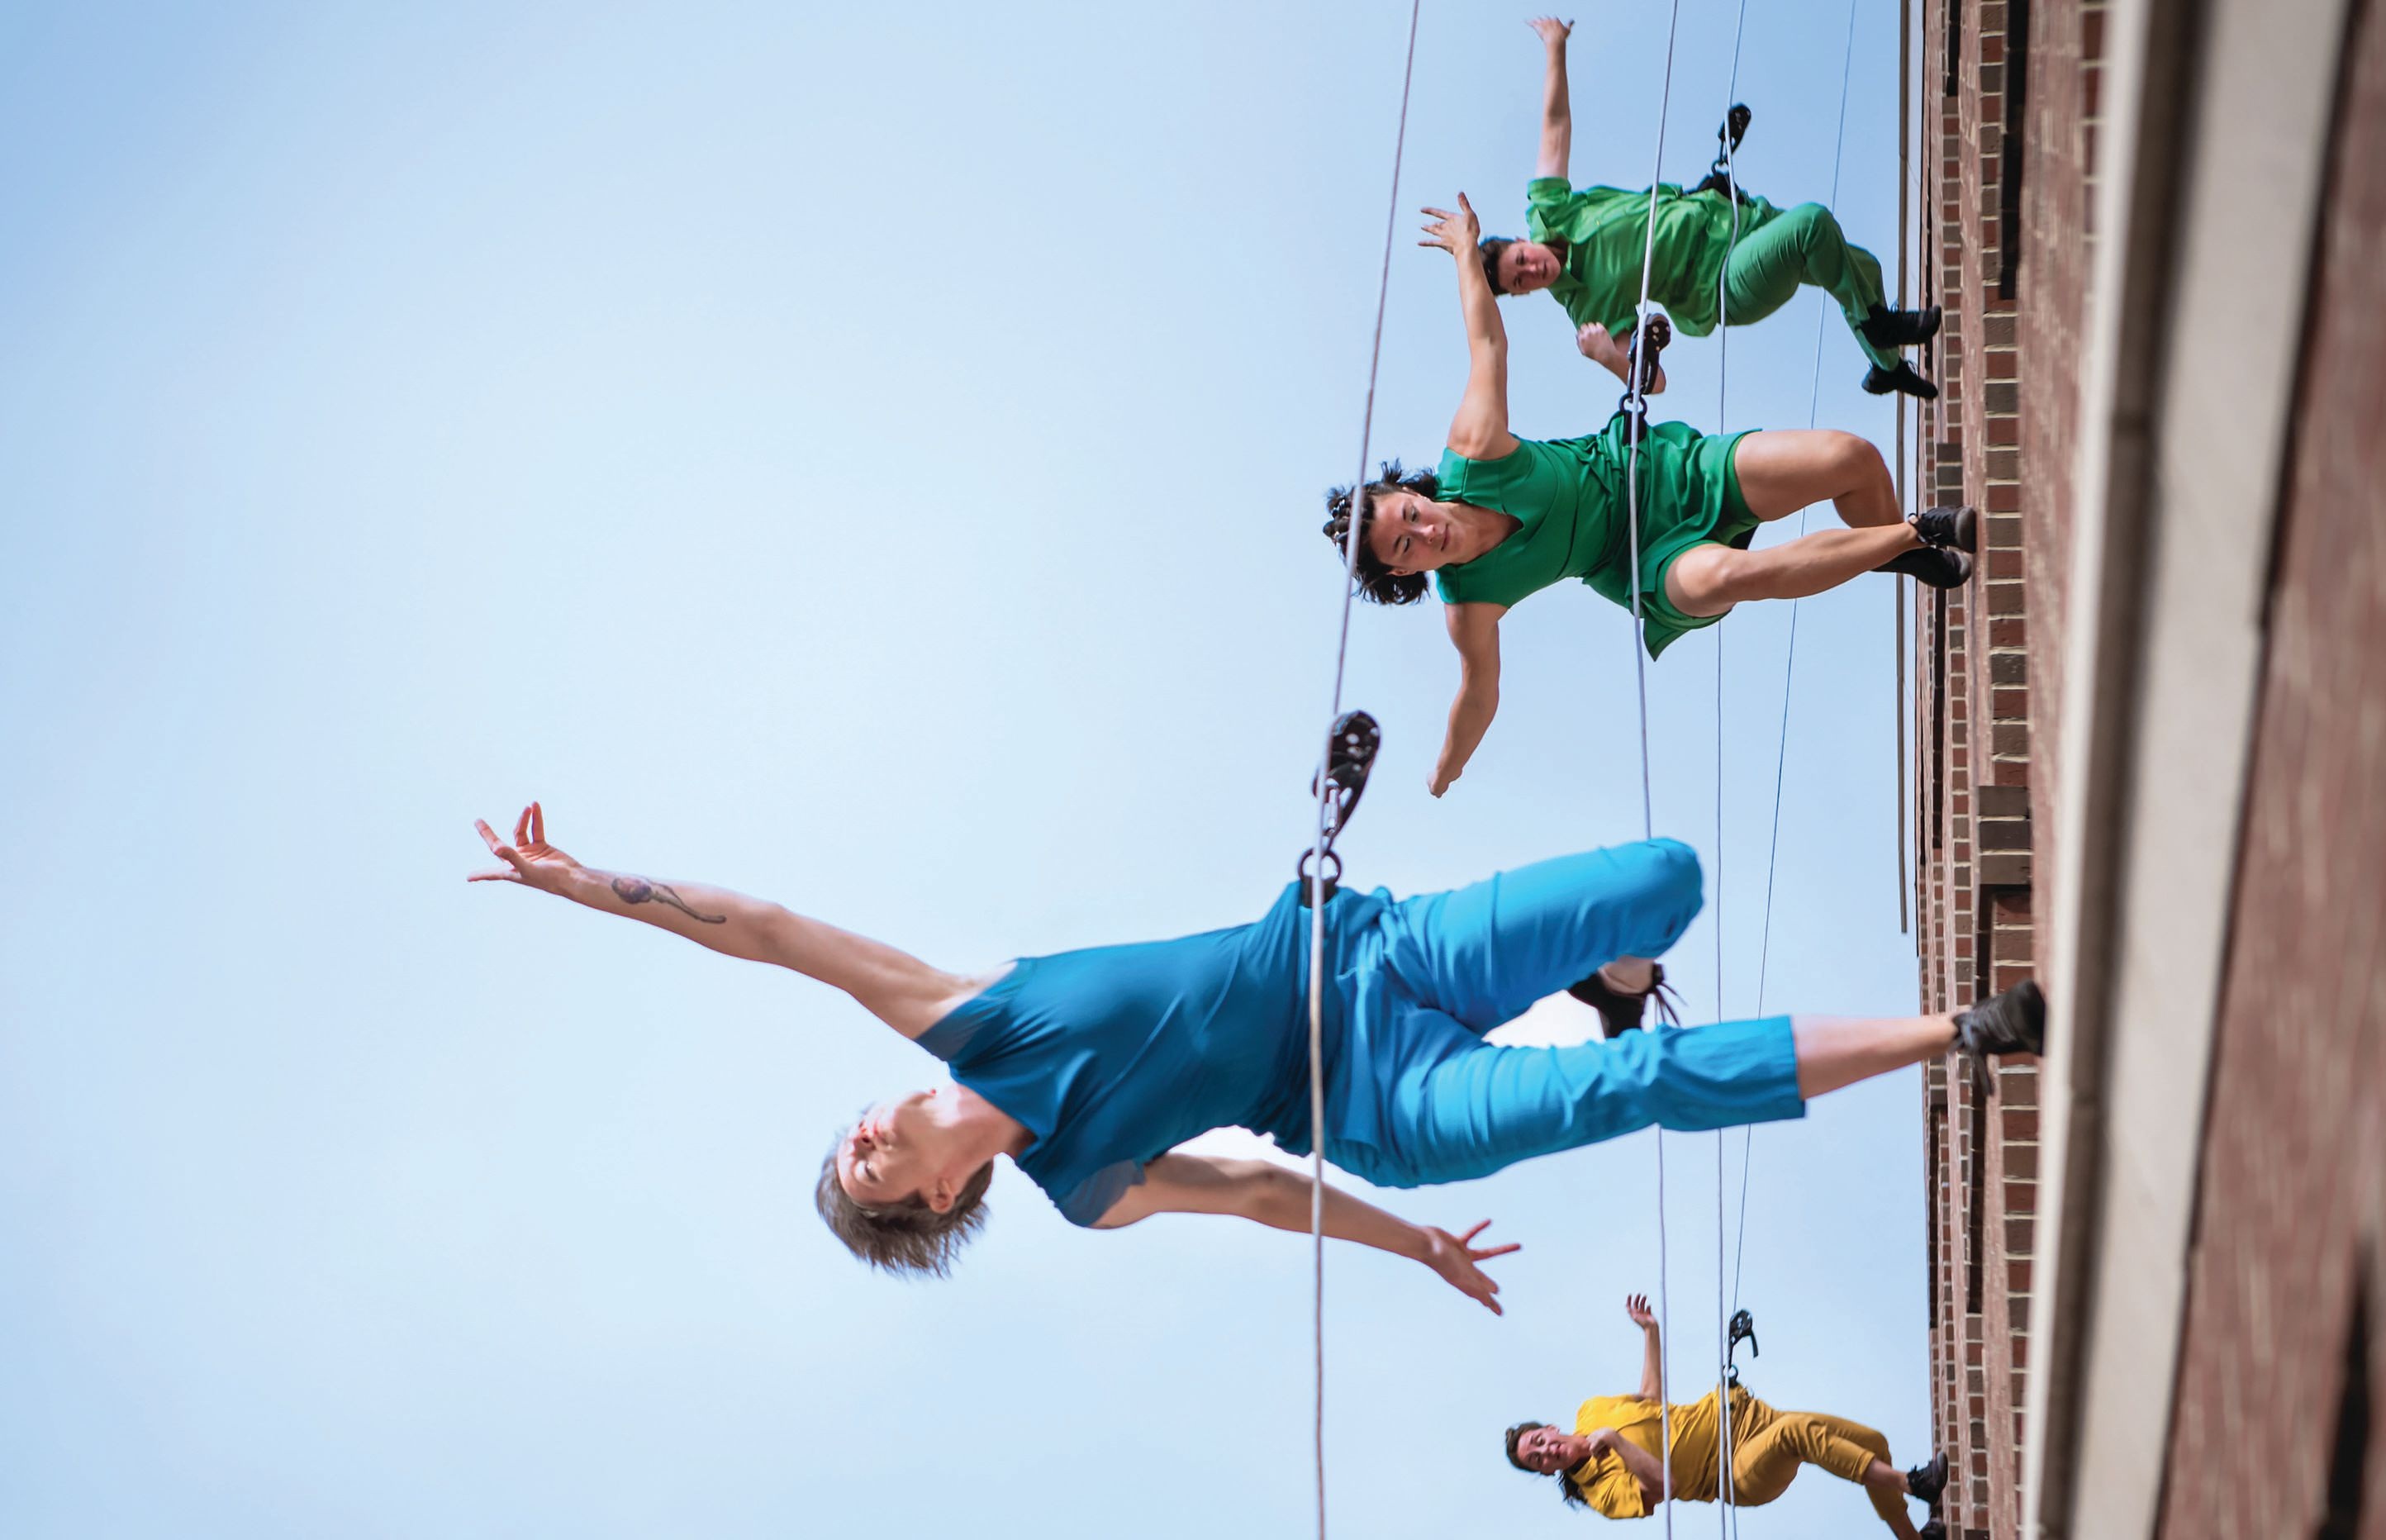 Bandaloop celebrates 30 years with free performances this month. PHOTO BY BROOKE ANDERSON